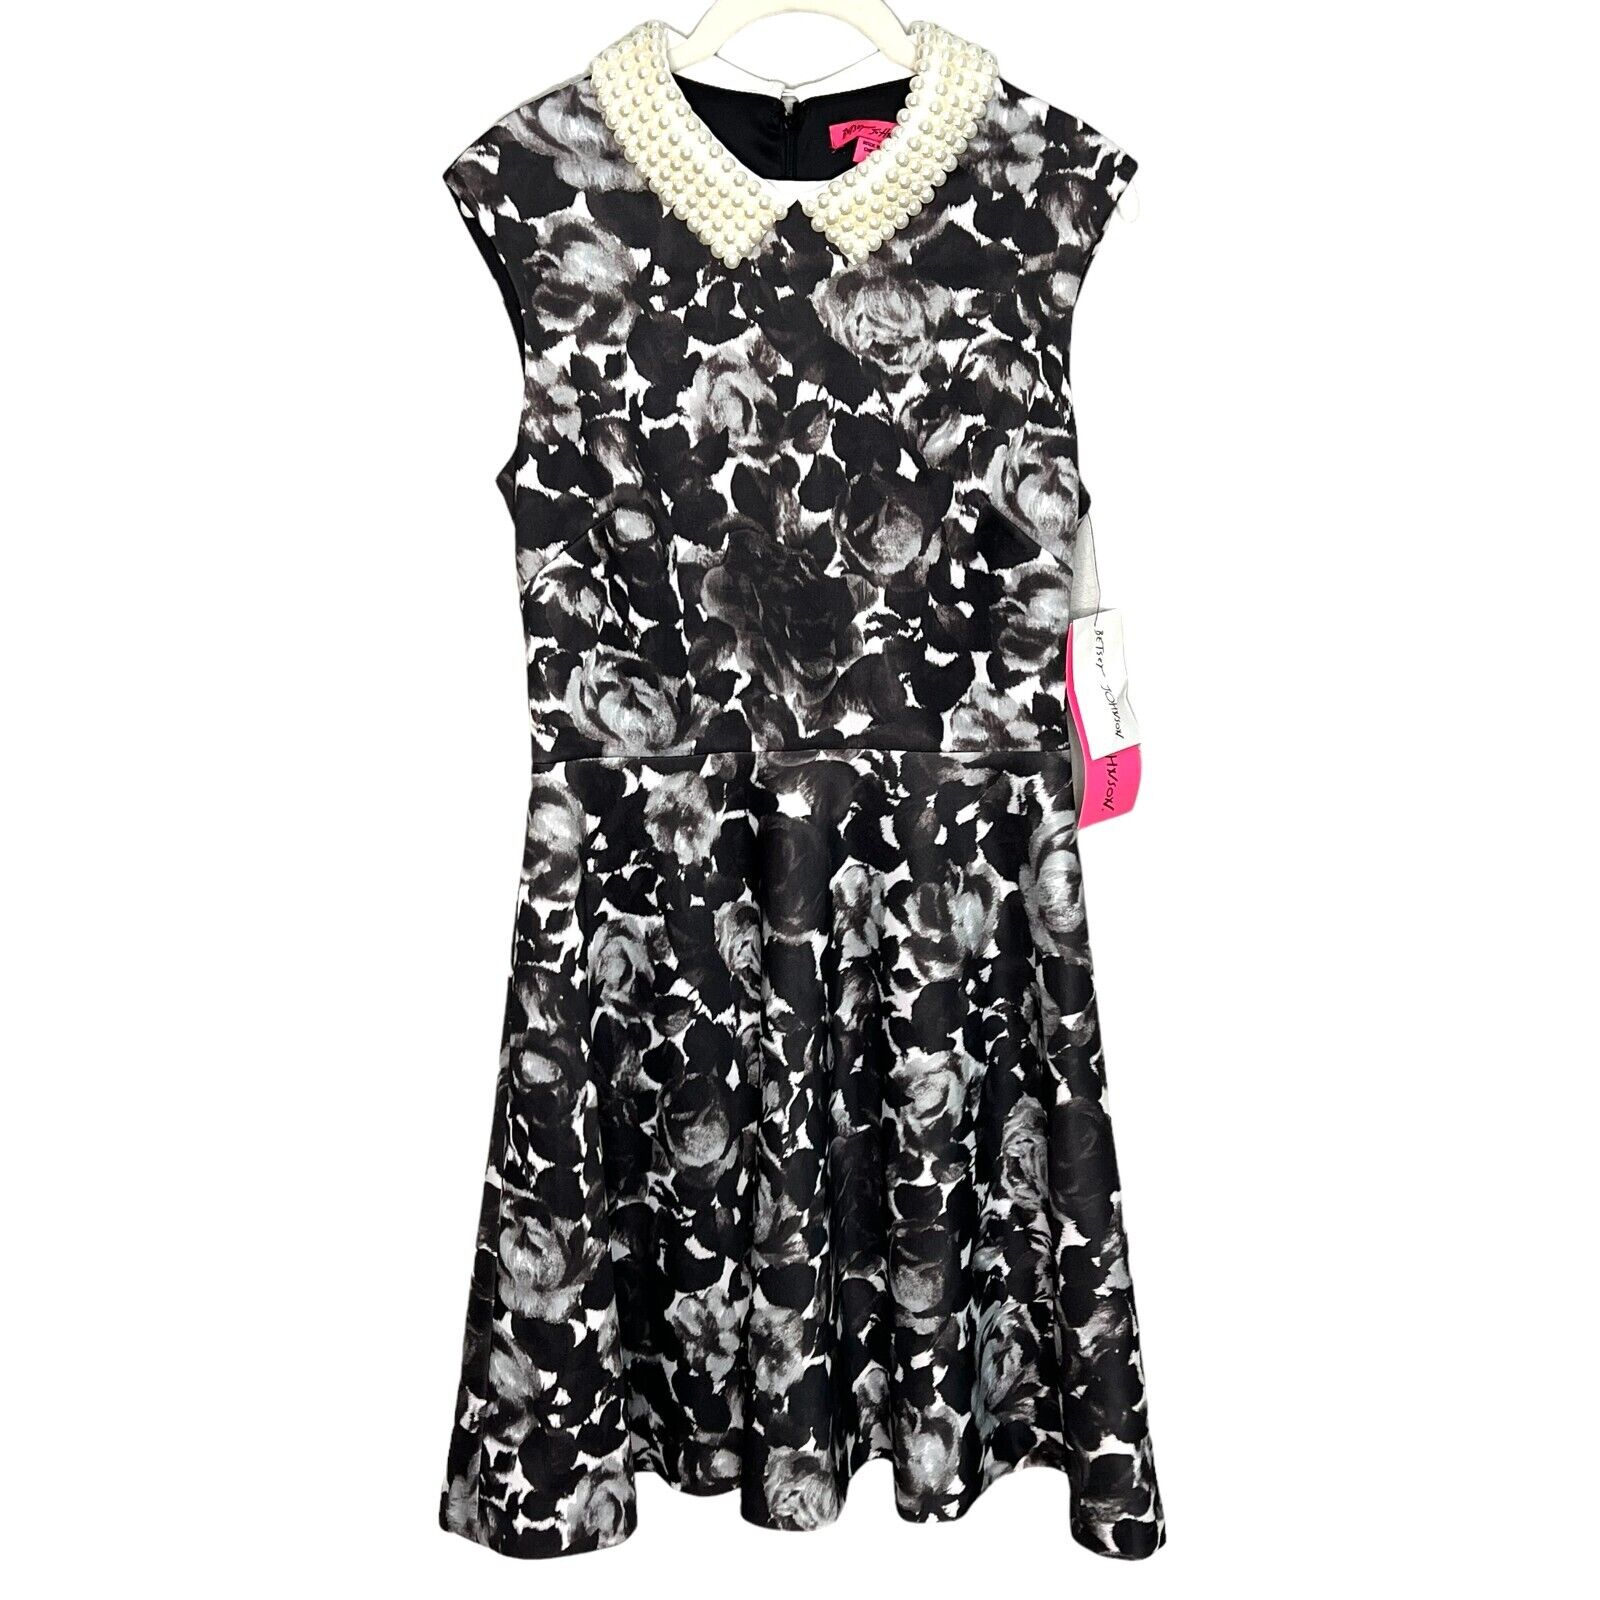 Betsey Johnson Black White Floral Rose Pearl Color Dress Size 6 NEW $158